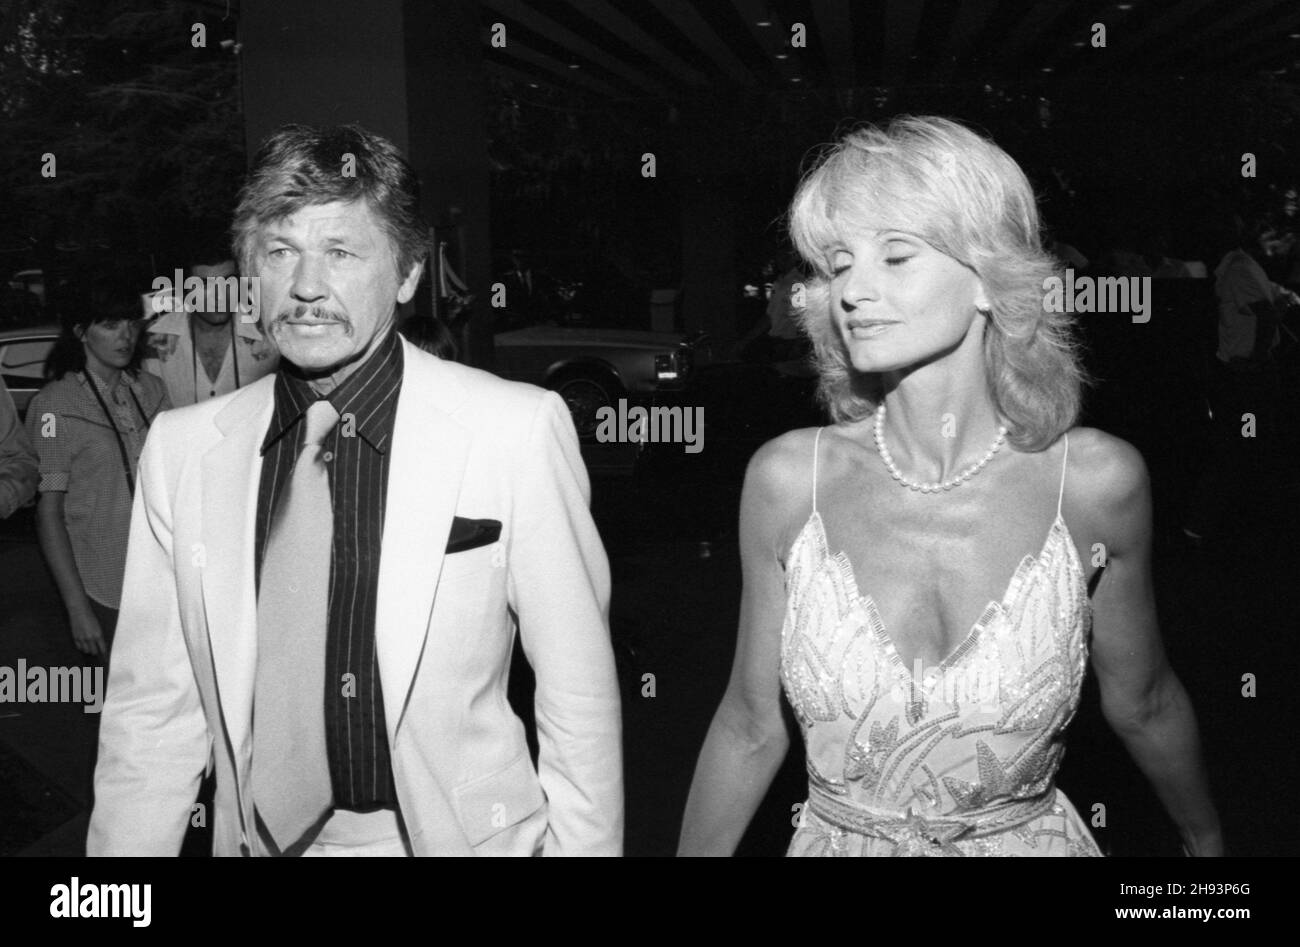 Charles Bronson and Jill Ireland  at the wedding reception for producer Al Ruddy and newspaper columnist Wanda McDaniel on June 21, 1981. Credit: Ralph Dominguez/MediaPunch Stock Photo